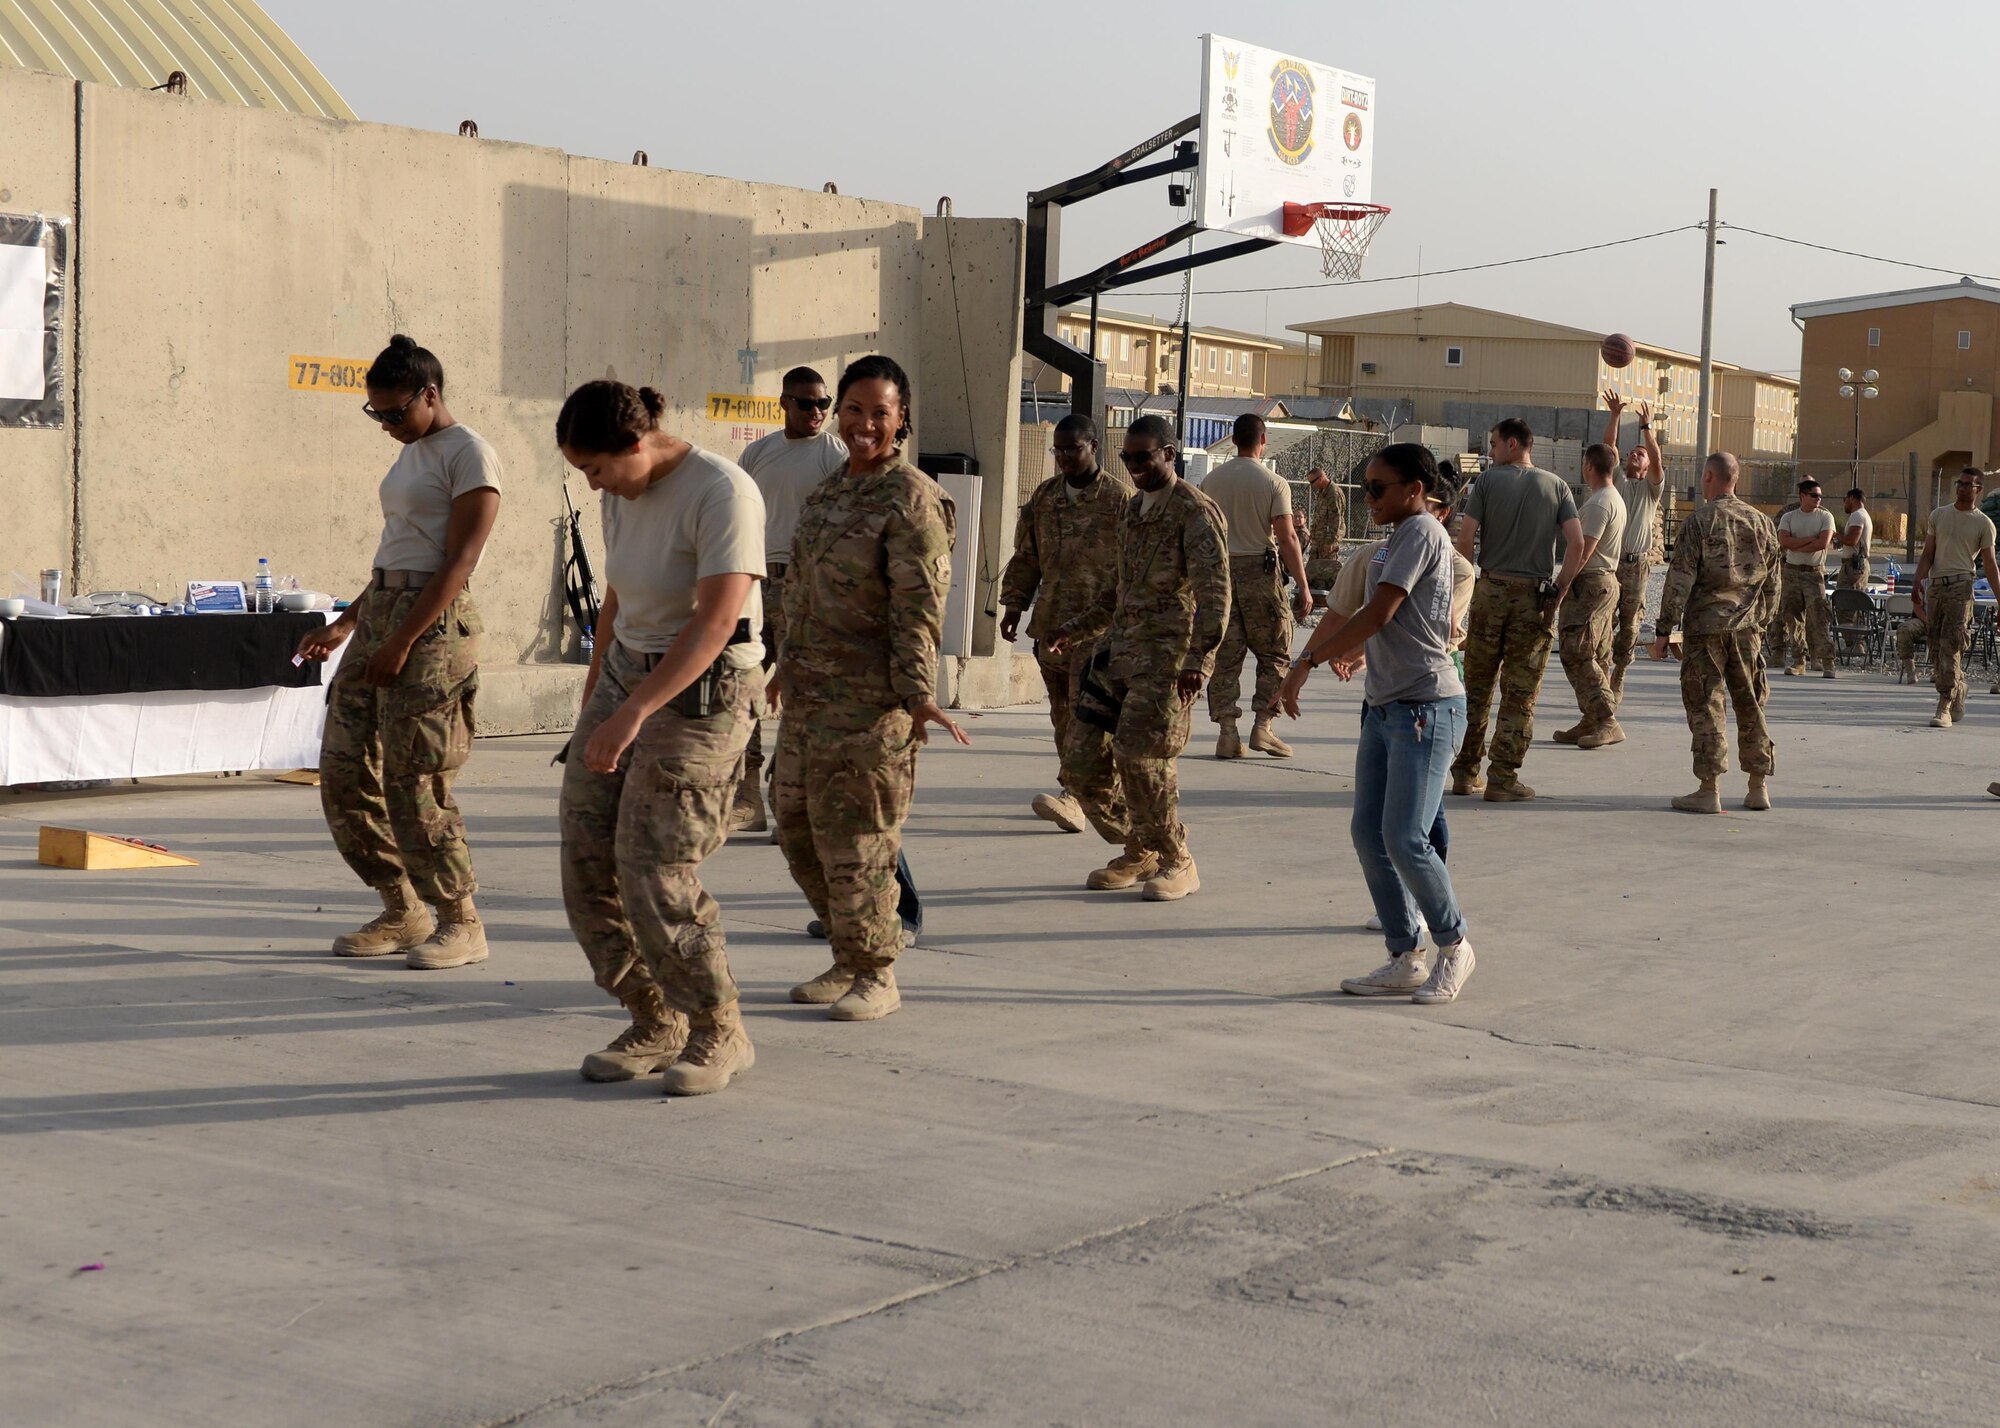 U.S. Airmen assigned to the 455th Air Expeditionary Wing dance to music during a block party held in honor of the Air Force’s 68th birthday Sept. 18, 2015, at Bagram Air Field, Afghanistan. The block party which was hosted by the Armed Forces Committed to Excellence council, the 455th Force Support Squadron and other private organizations featured games, food and a traditional AF cake cutting ceremony. (U.S. Air Force photo by Senior Airman Cierra Presentado/Released)